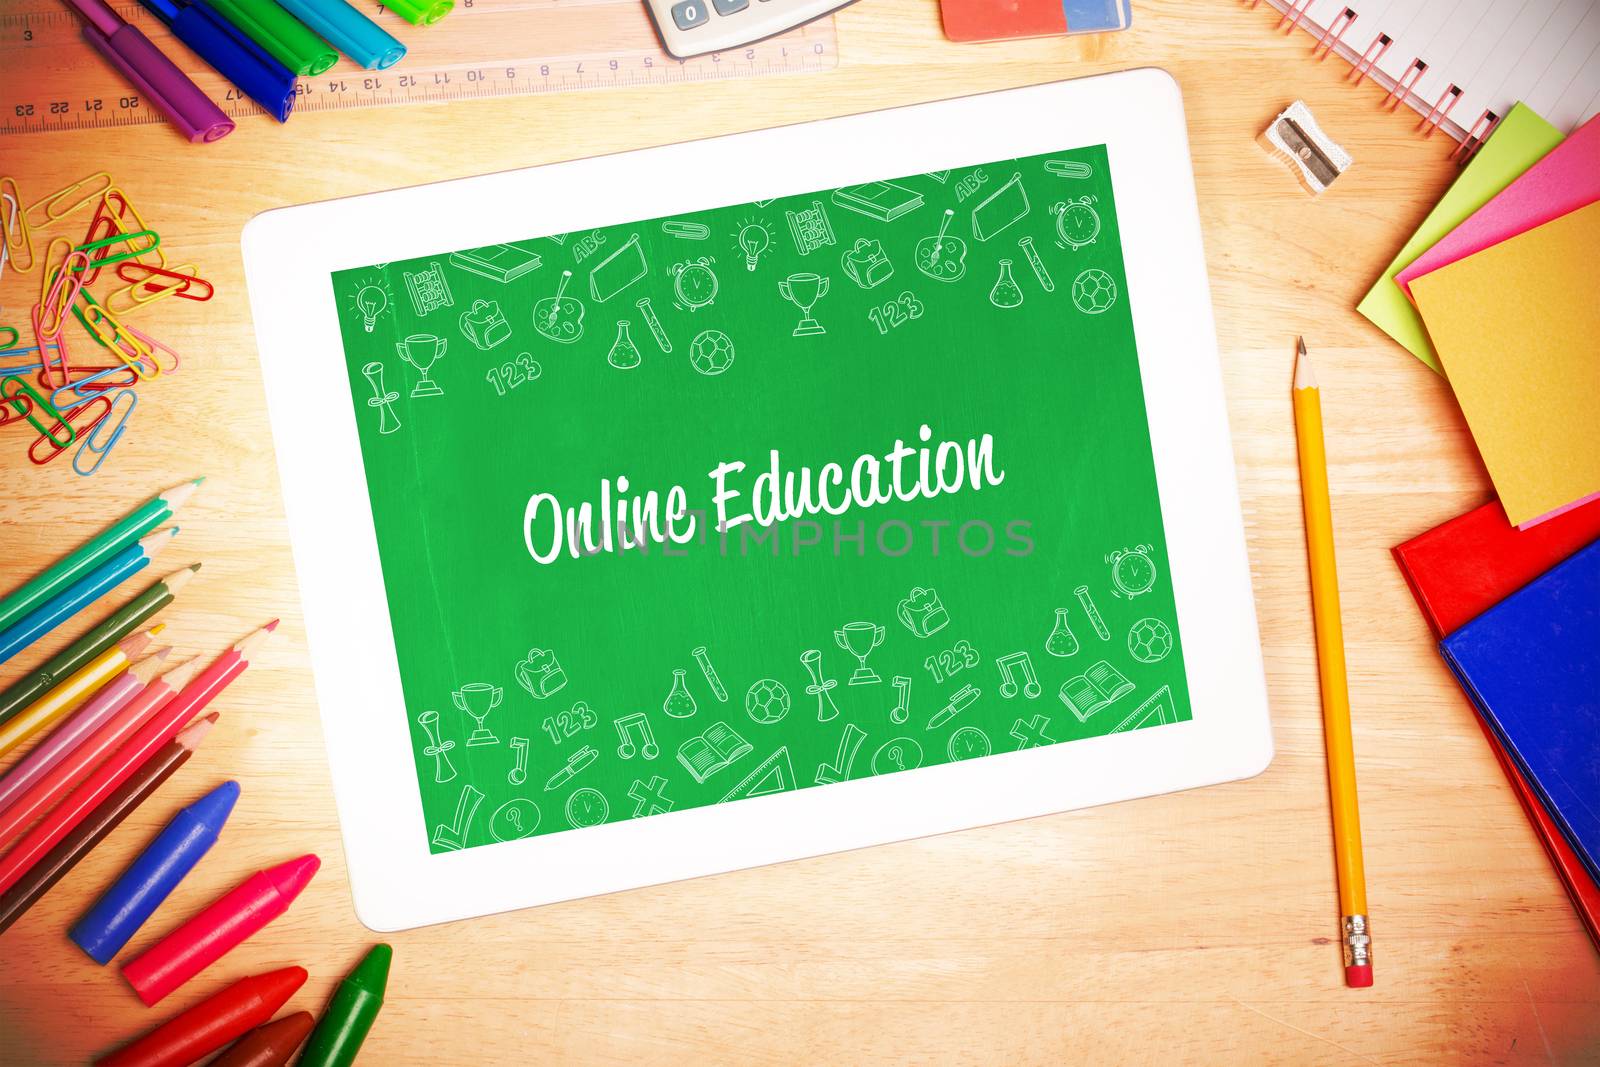 The word online education and school wallpaper against students desk with tablet pc